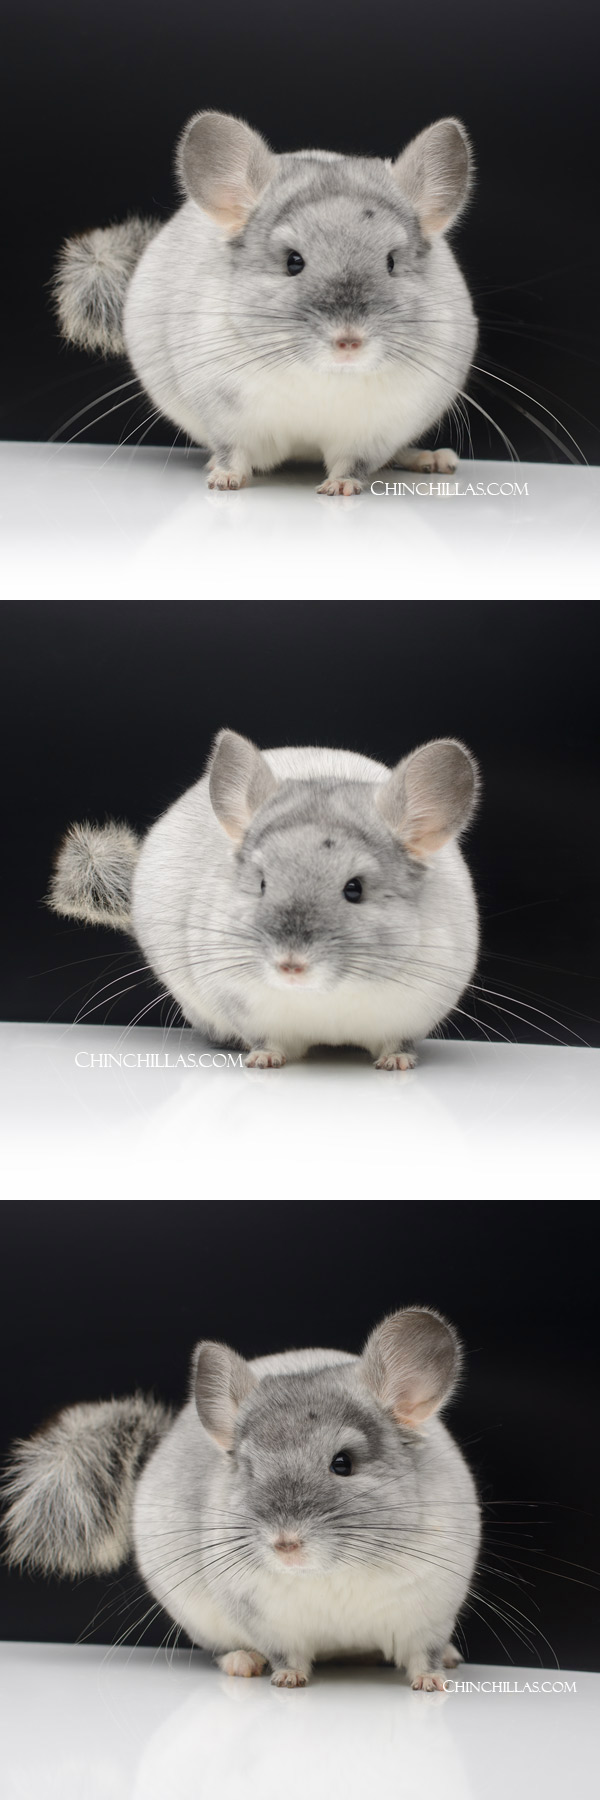 Chinchilla or related item offered for sale or export on Chinchillas.com - 23120 Brevi-type TOV White Male Chinchilla